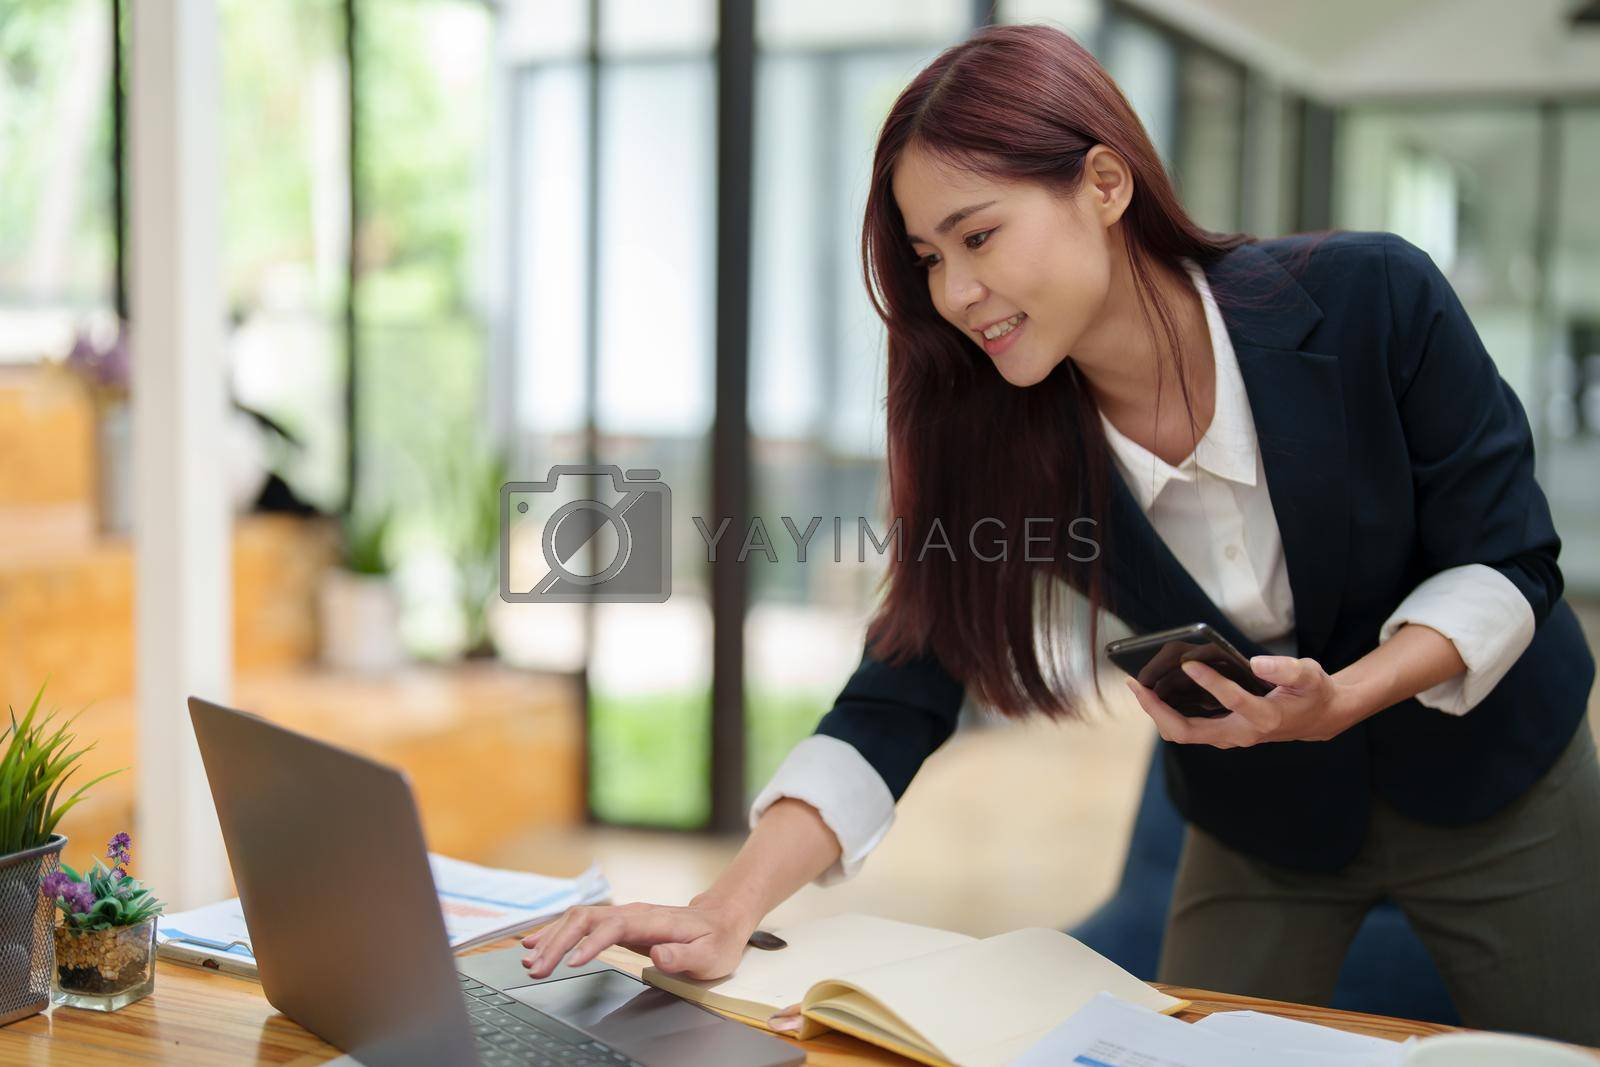 Royalty free image of Asian businesswoman using the phone to contact a business partner by Manastrong